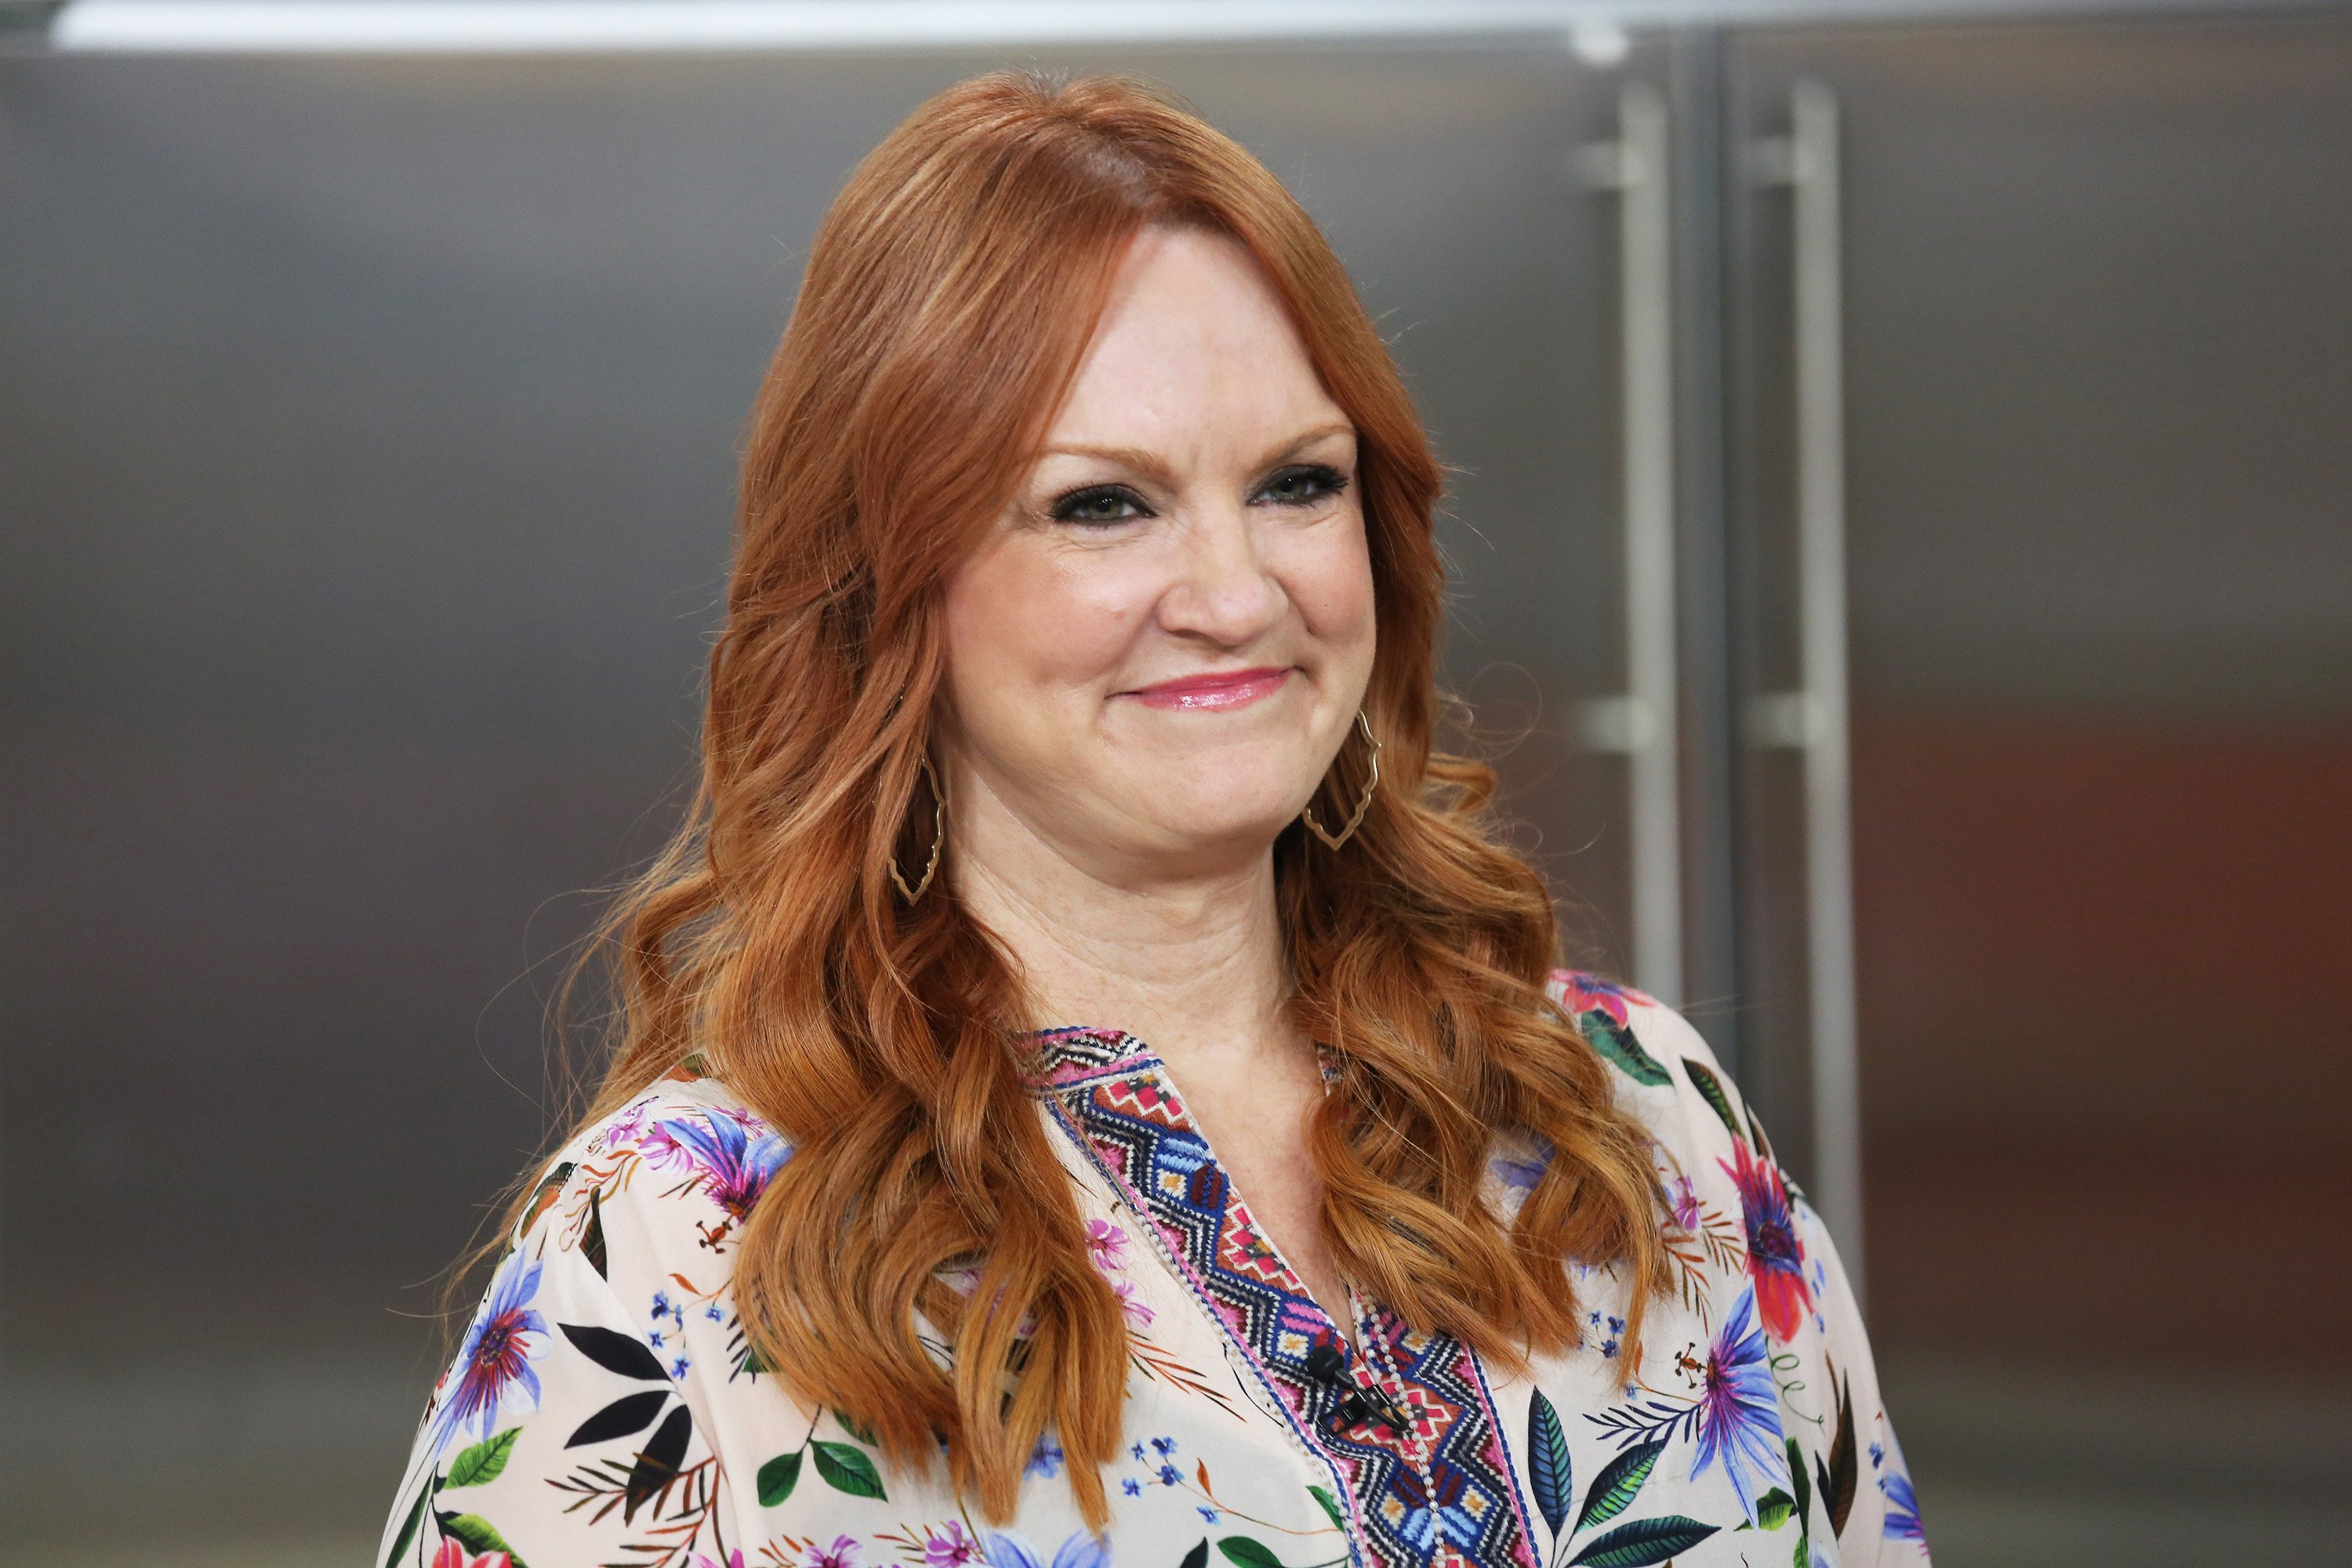 Ree Drummond poses on the Today show